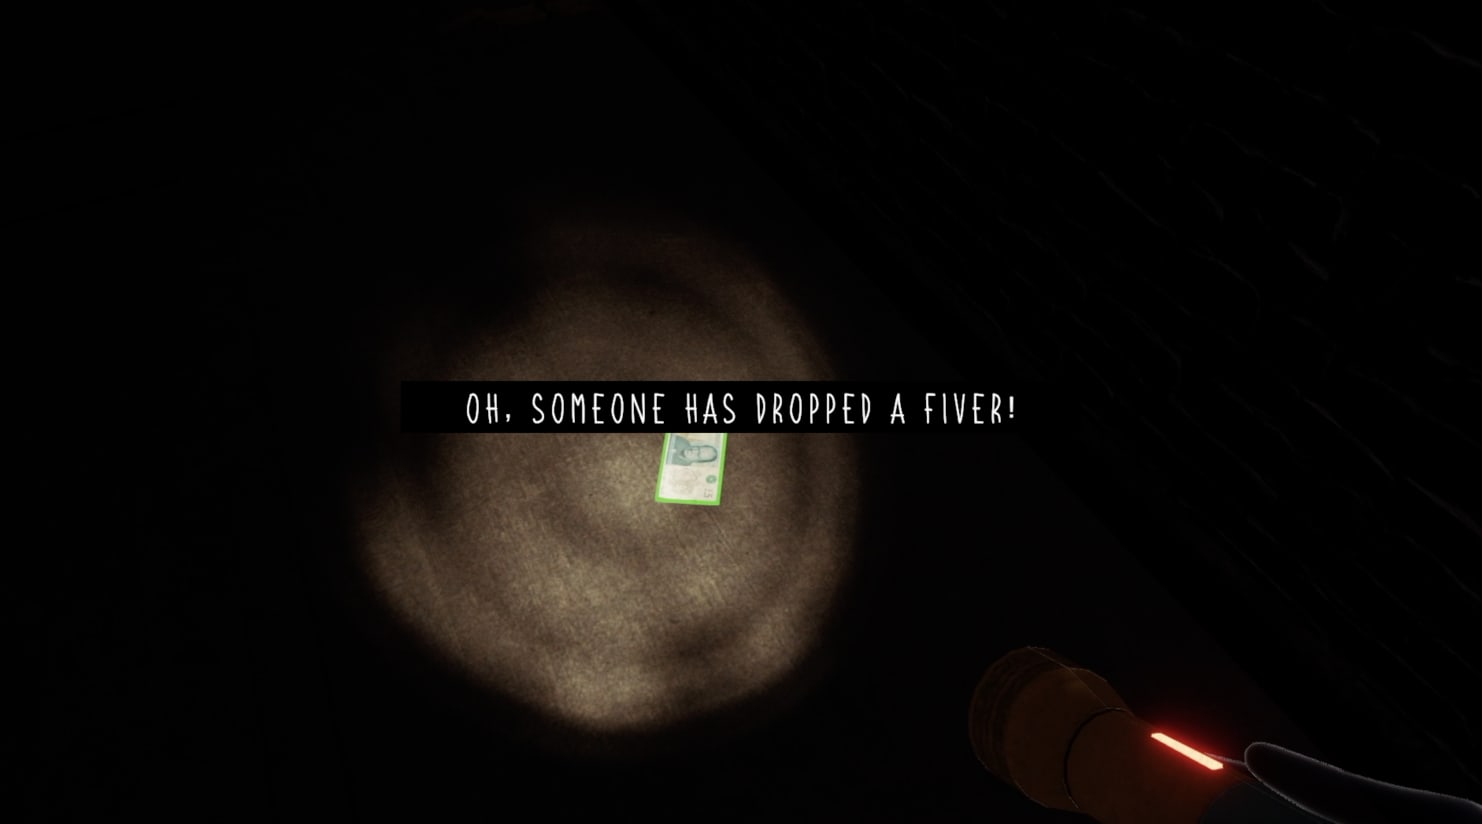 In-game screenshot in which an interactive object is discovered. The room is dark, perspective limited by the reach of the torchlight. Dialogue text across the centre of the image, white on black, reads ‘Oh, someone has dropped a fiver.’ Underneath this text, illuminated by the torch, lies a modern plastic £5 note in good condition, on the floor of the room.